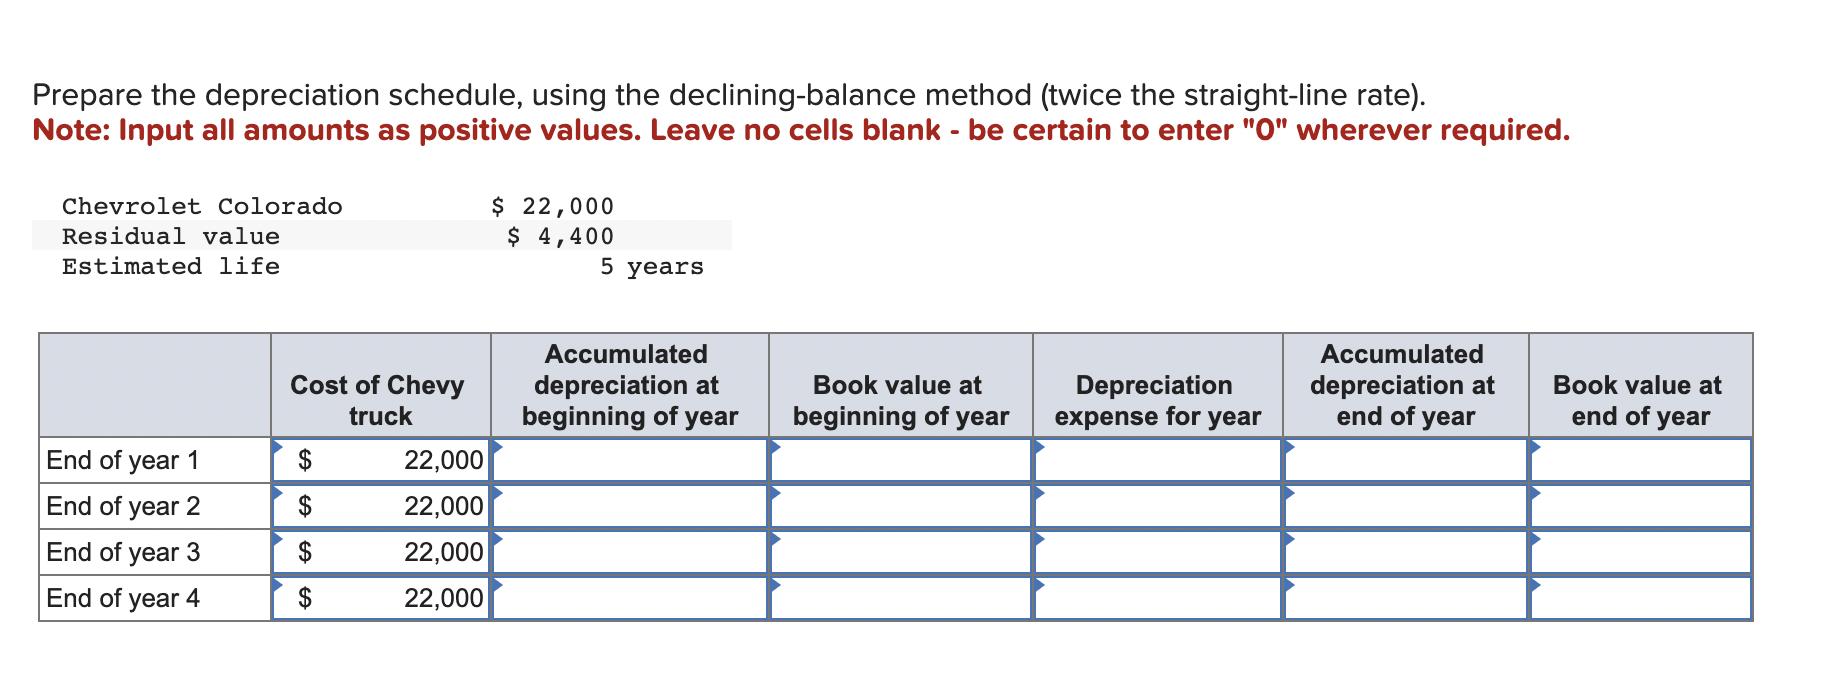 Prepare the depreciation schedule, using the declining-balance method (twice the straight-line rate). Note: Input all amounts